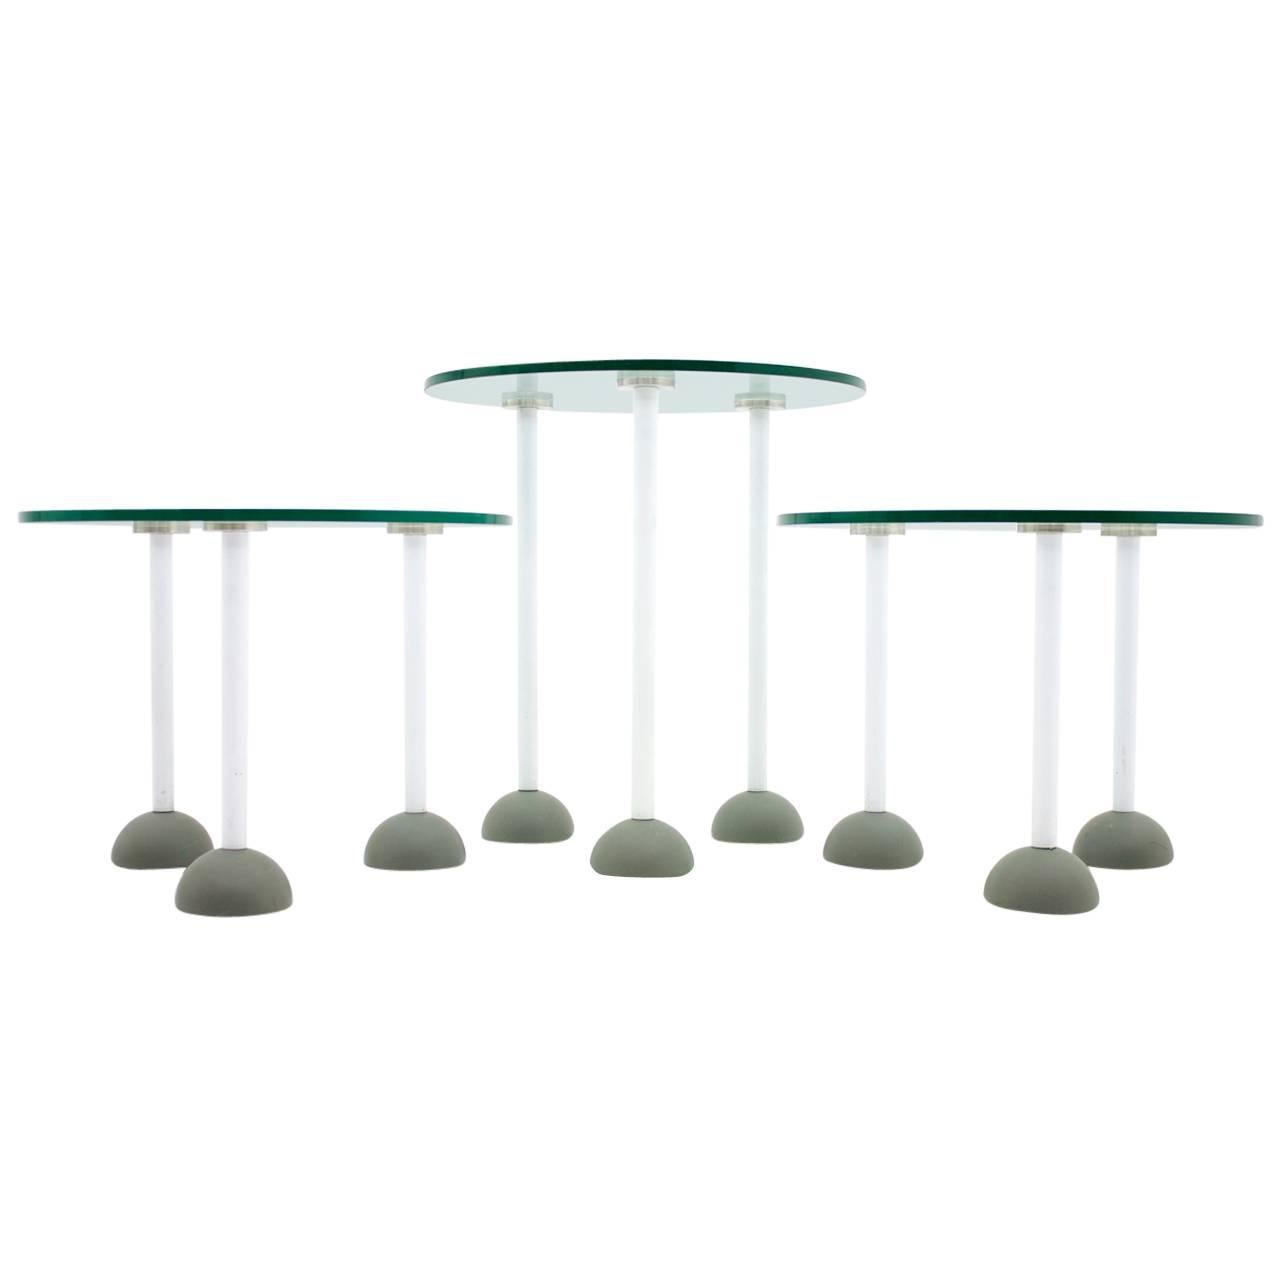 Set of Three Glass Tables with Wheels, Memphis, 1987 For Sale